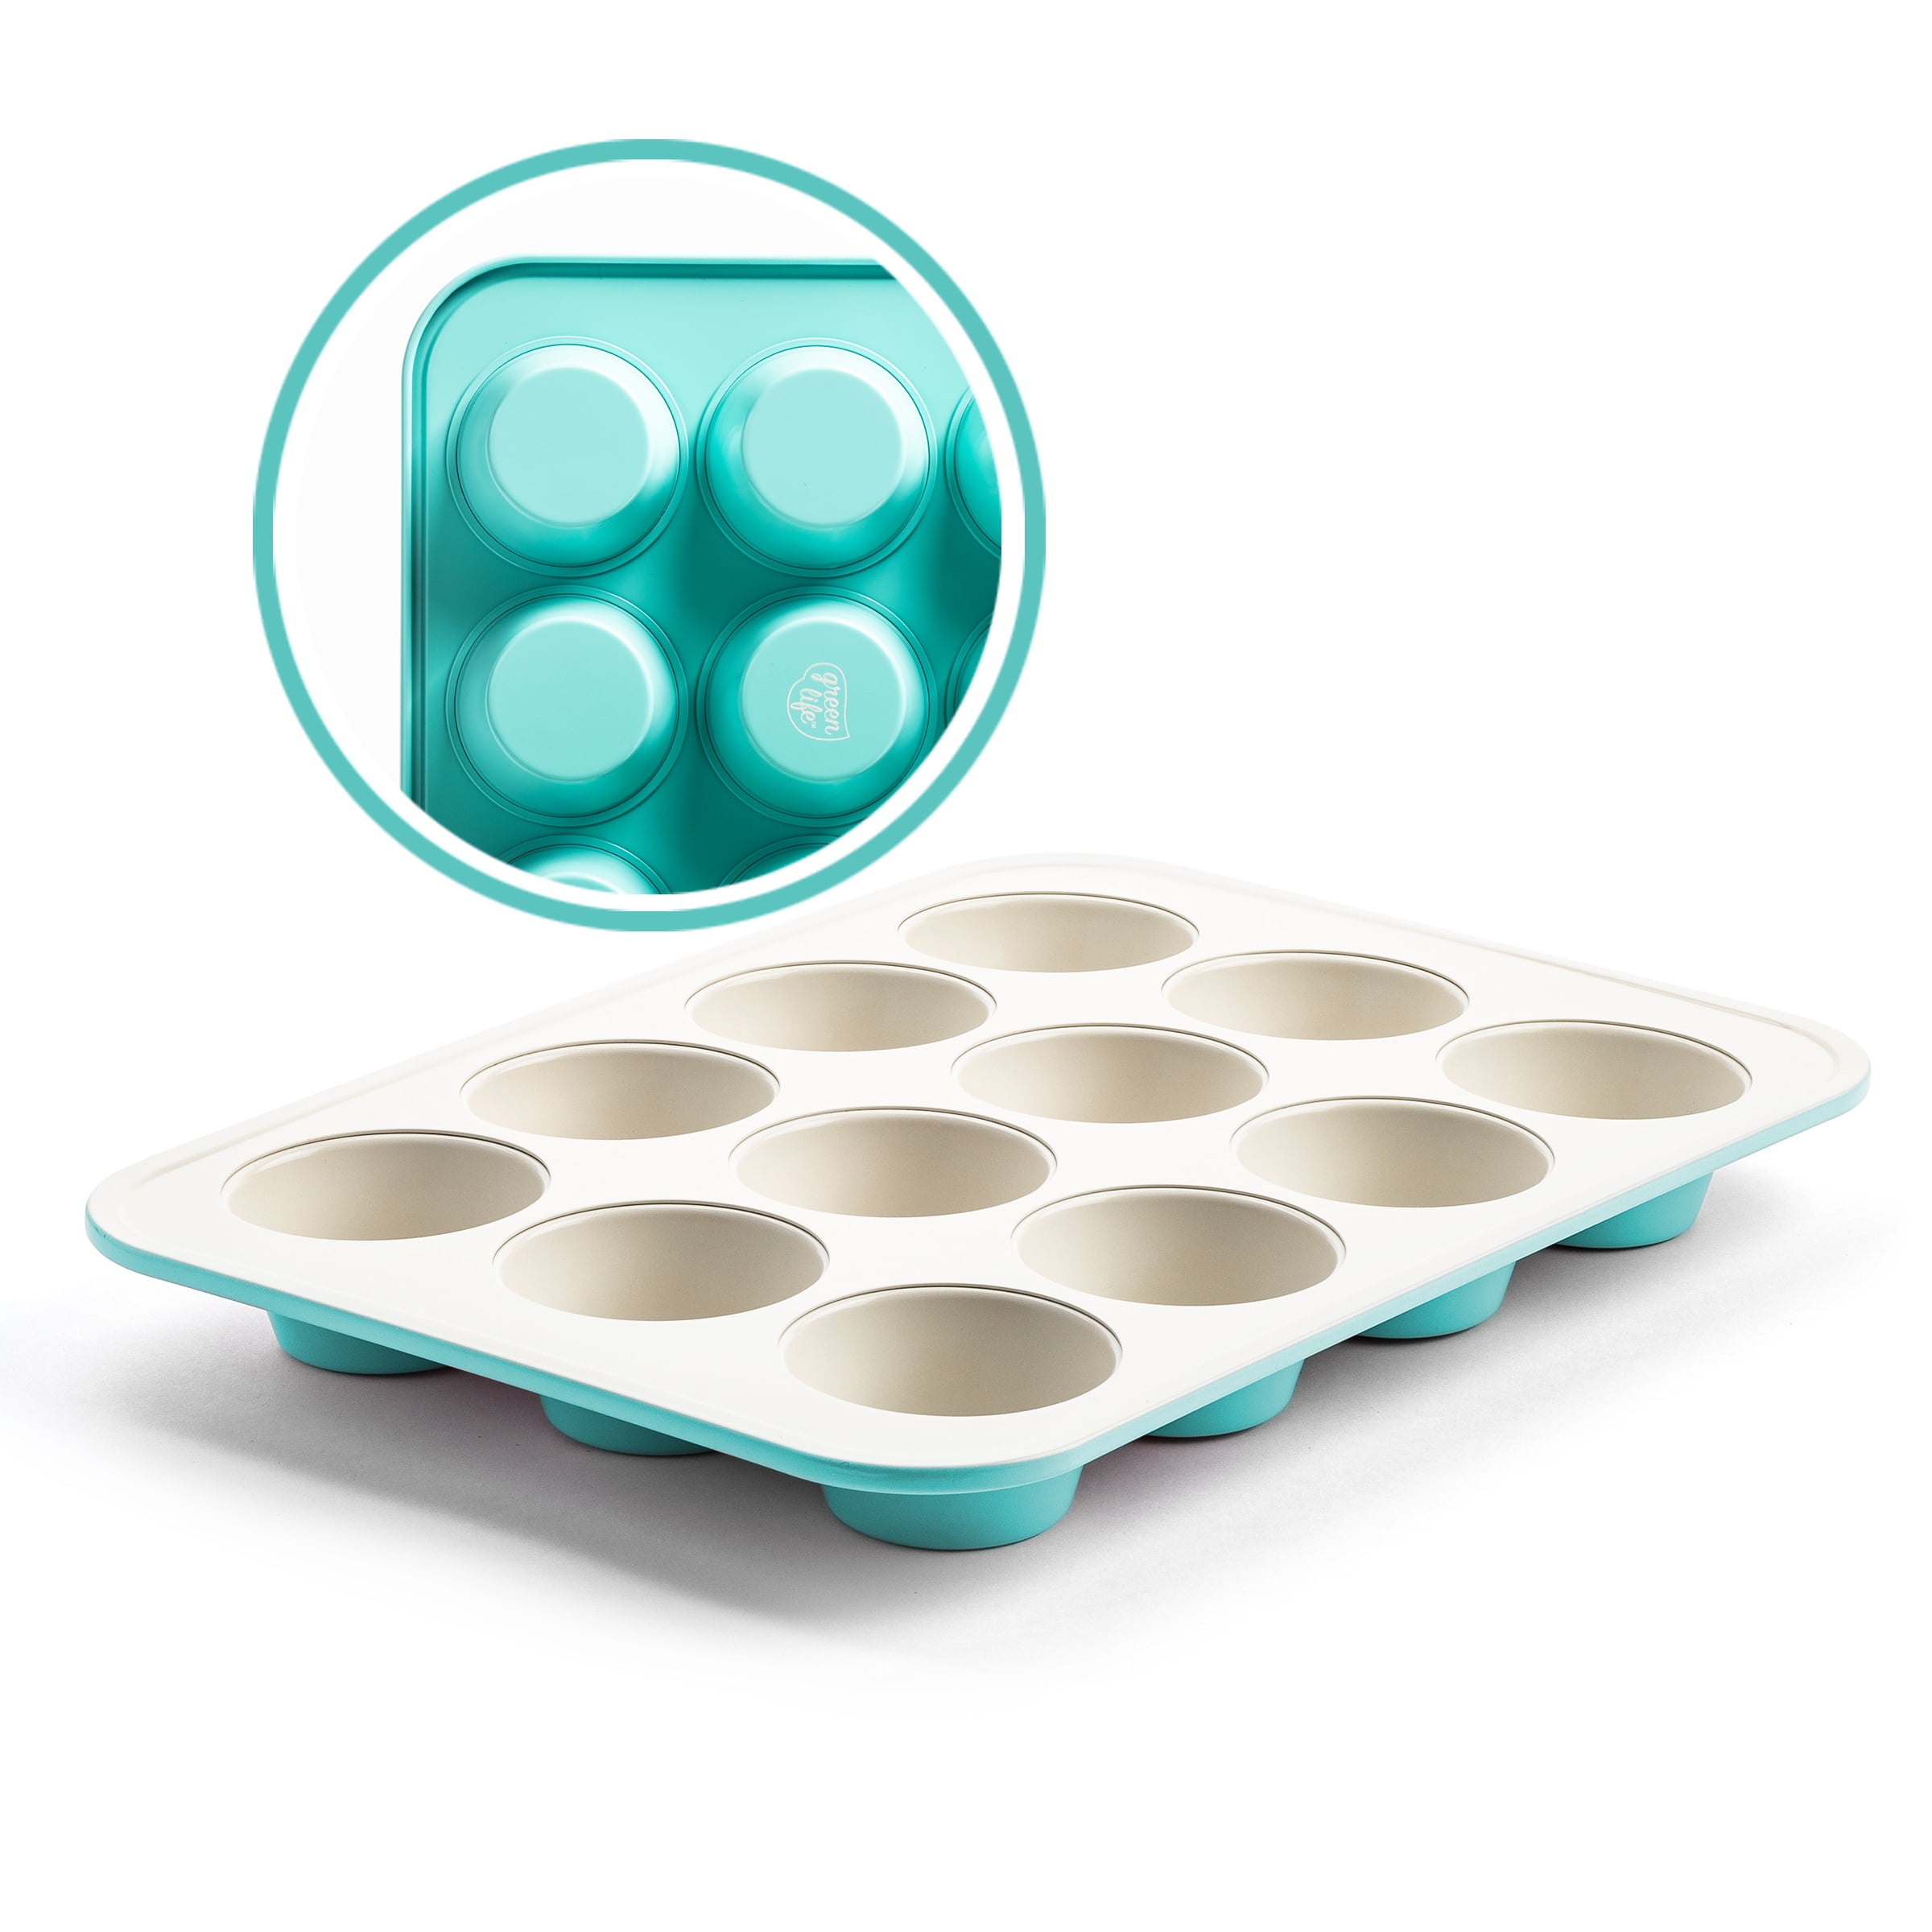 JXWING 6 Cups Non-stick Silicone Cupcake Baking Pan with Ergonomics Grips,  Premium Stainless Steel Core Muffin Pan, Green